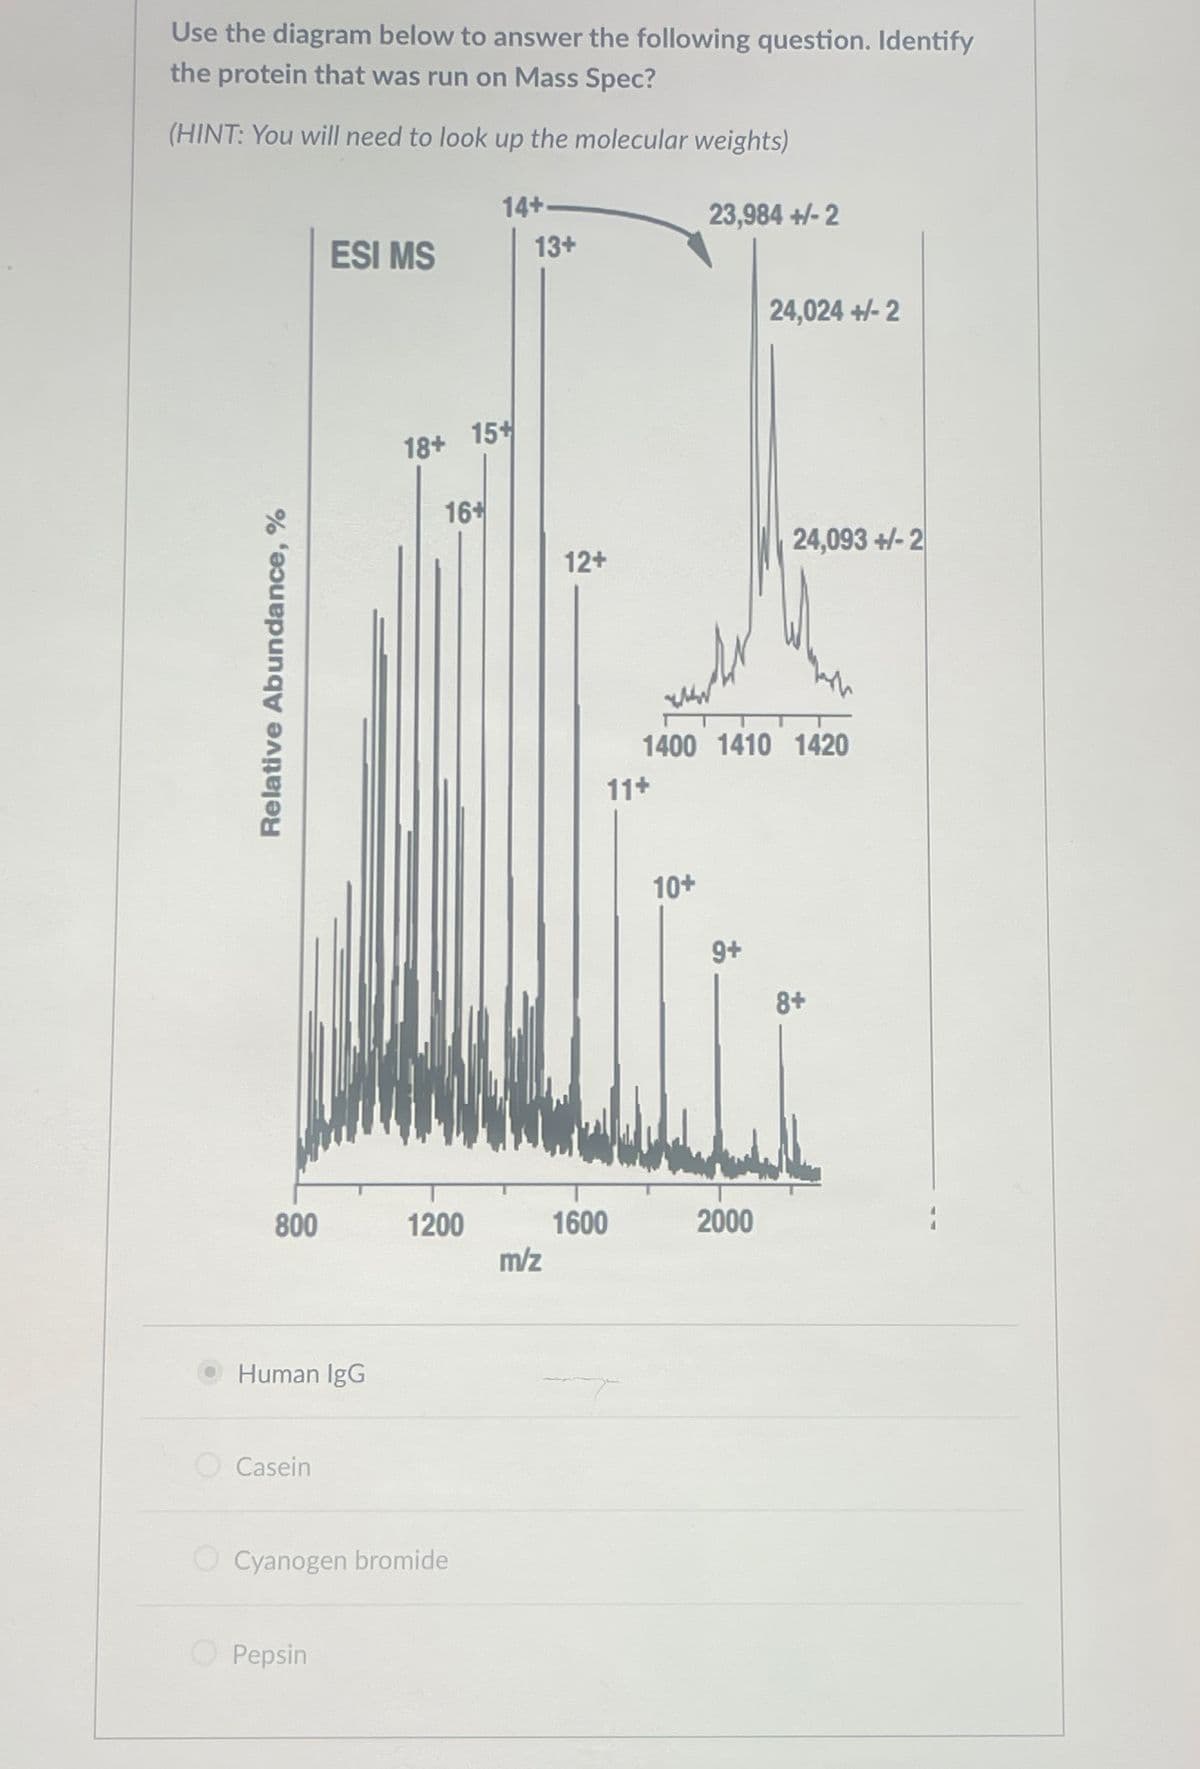 Use the diagram below to answer the following question. Identify
the protein that was run on Mass Spec?
(HINT: You will need to look up the molecular weights)
Relative Abundance, %
800
Human IgG
Casein
ESI MS
Pepsin
18+ 15+
16+
1200
Cyanogen bromide
14+-
13+
m/z
12+
11+
1600
23,984 +/-2
10+
1400 1410 1420
9+
24,024 +/-2
2000
24,093+/-2
8+